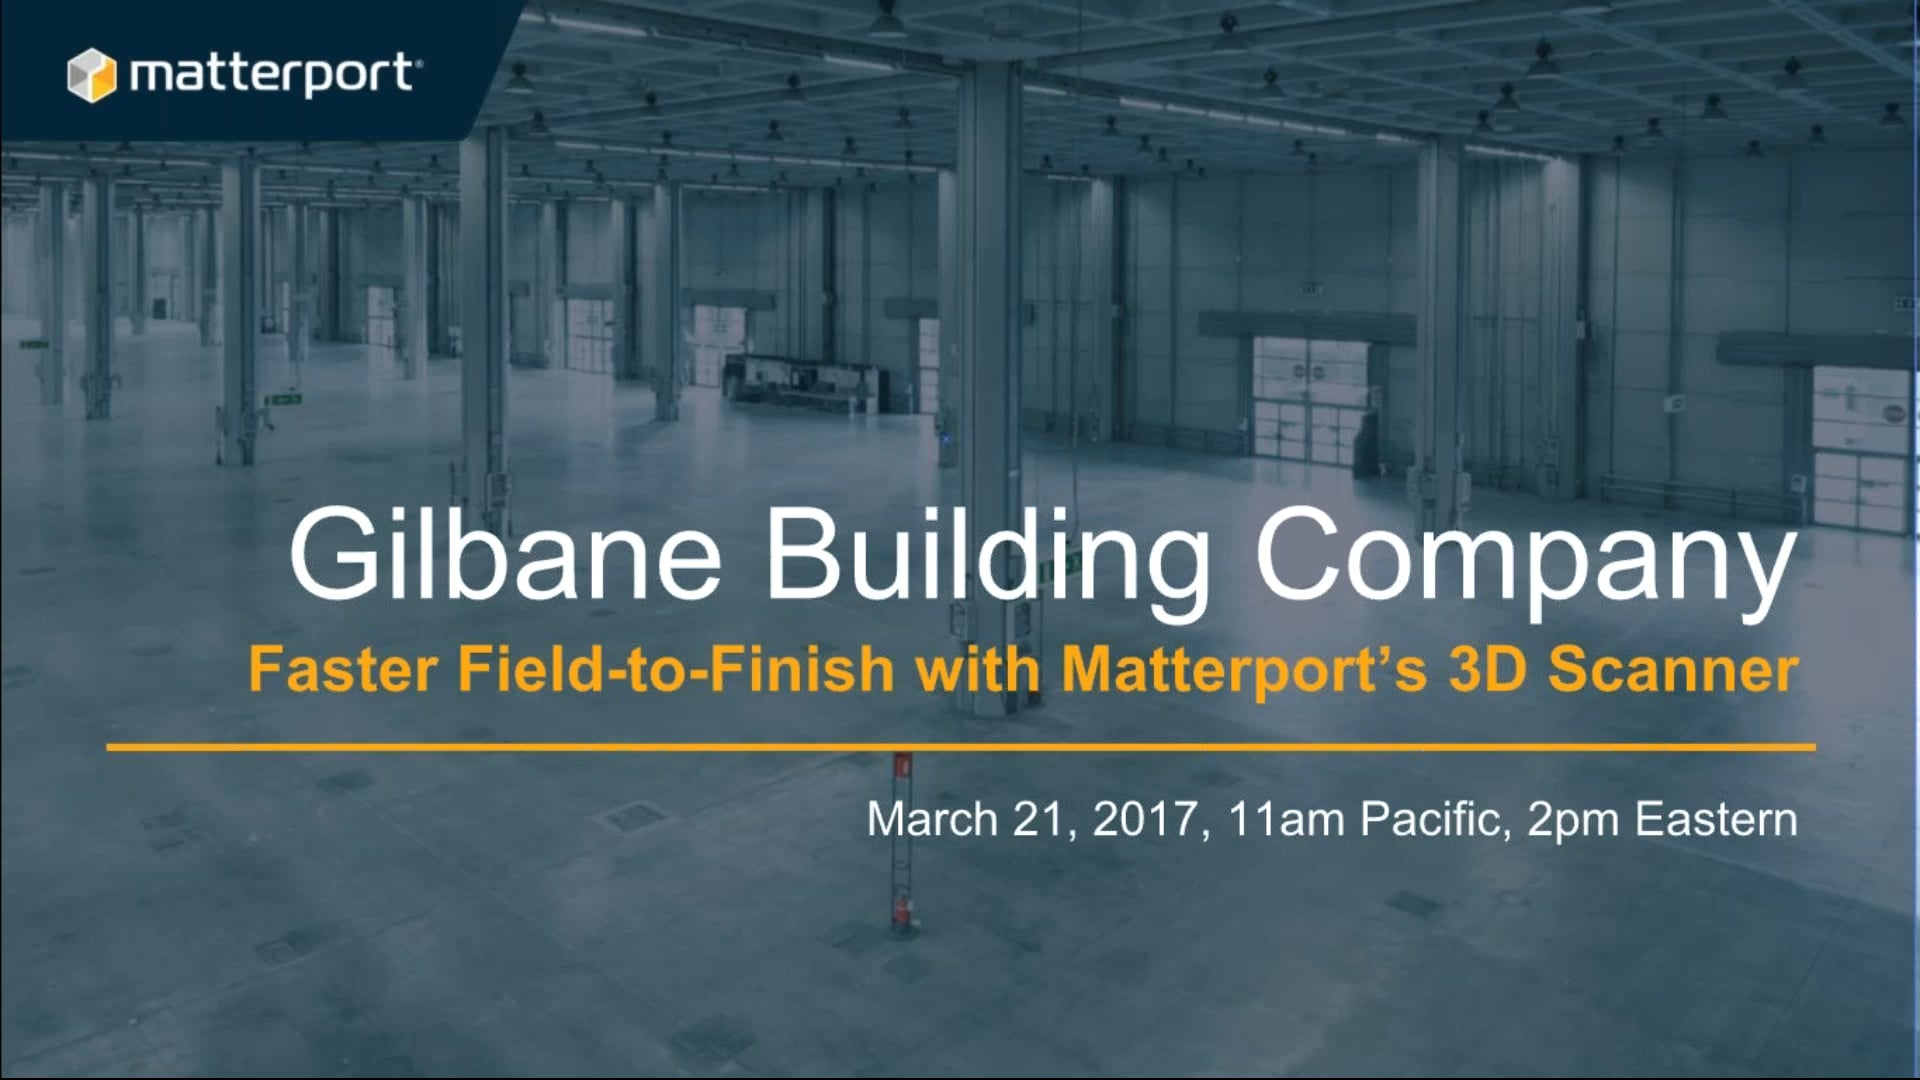 How Gilbane cuts their Field-to-Finish time with Matterport 3D Scanning